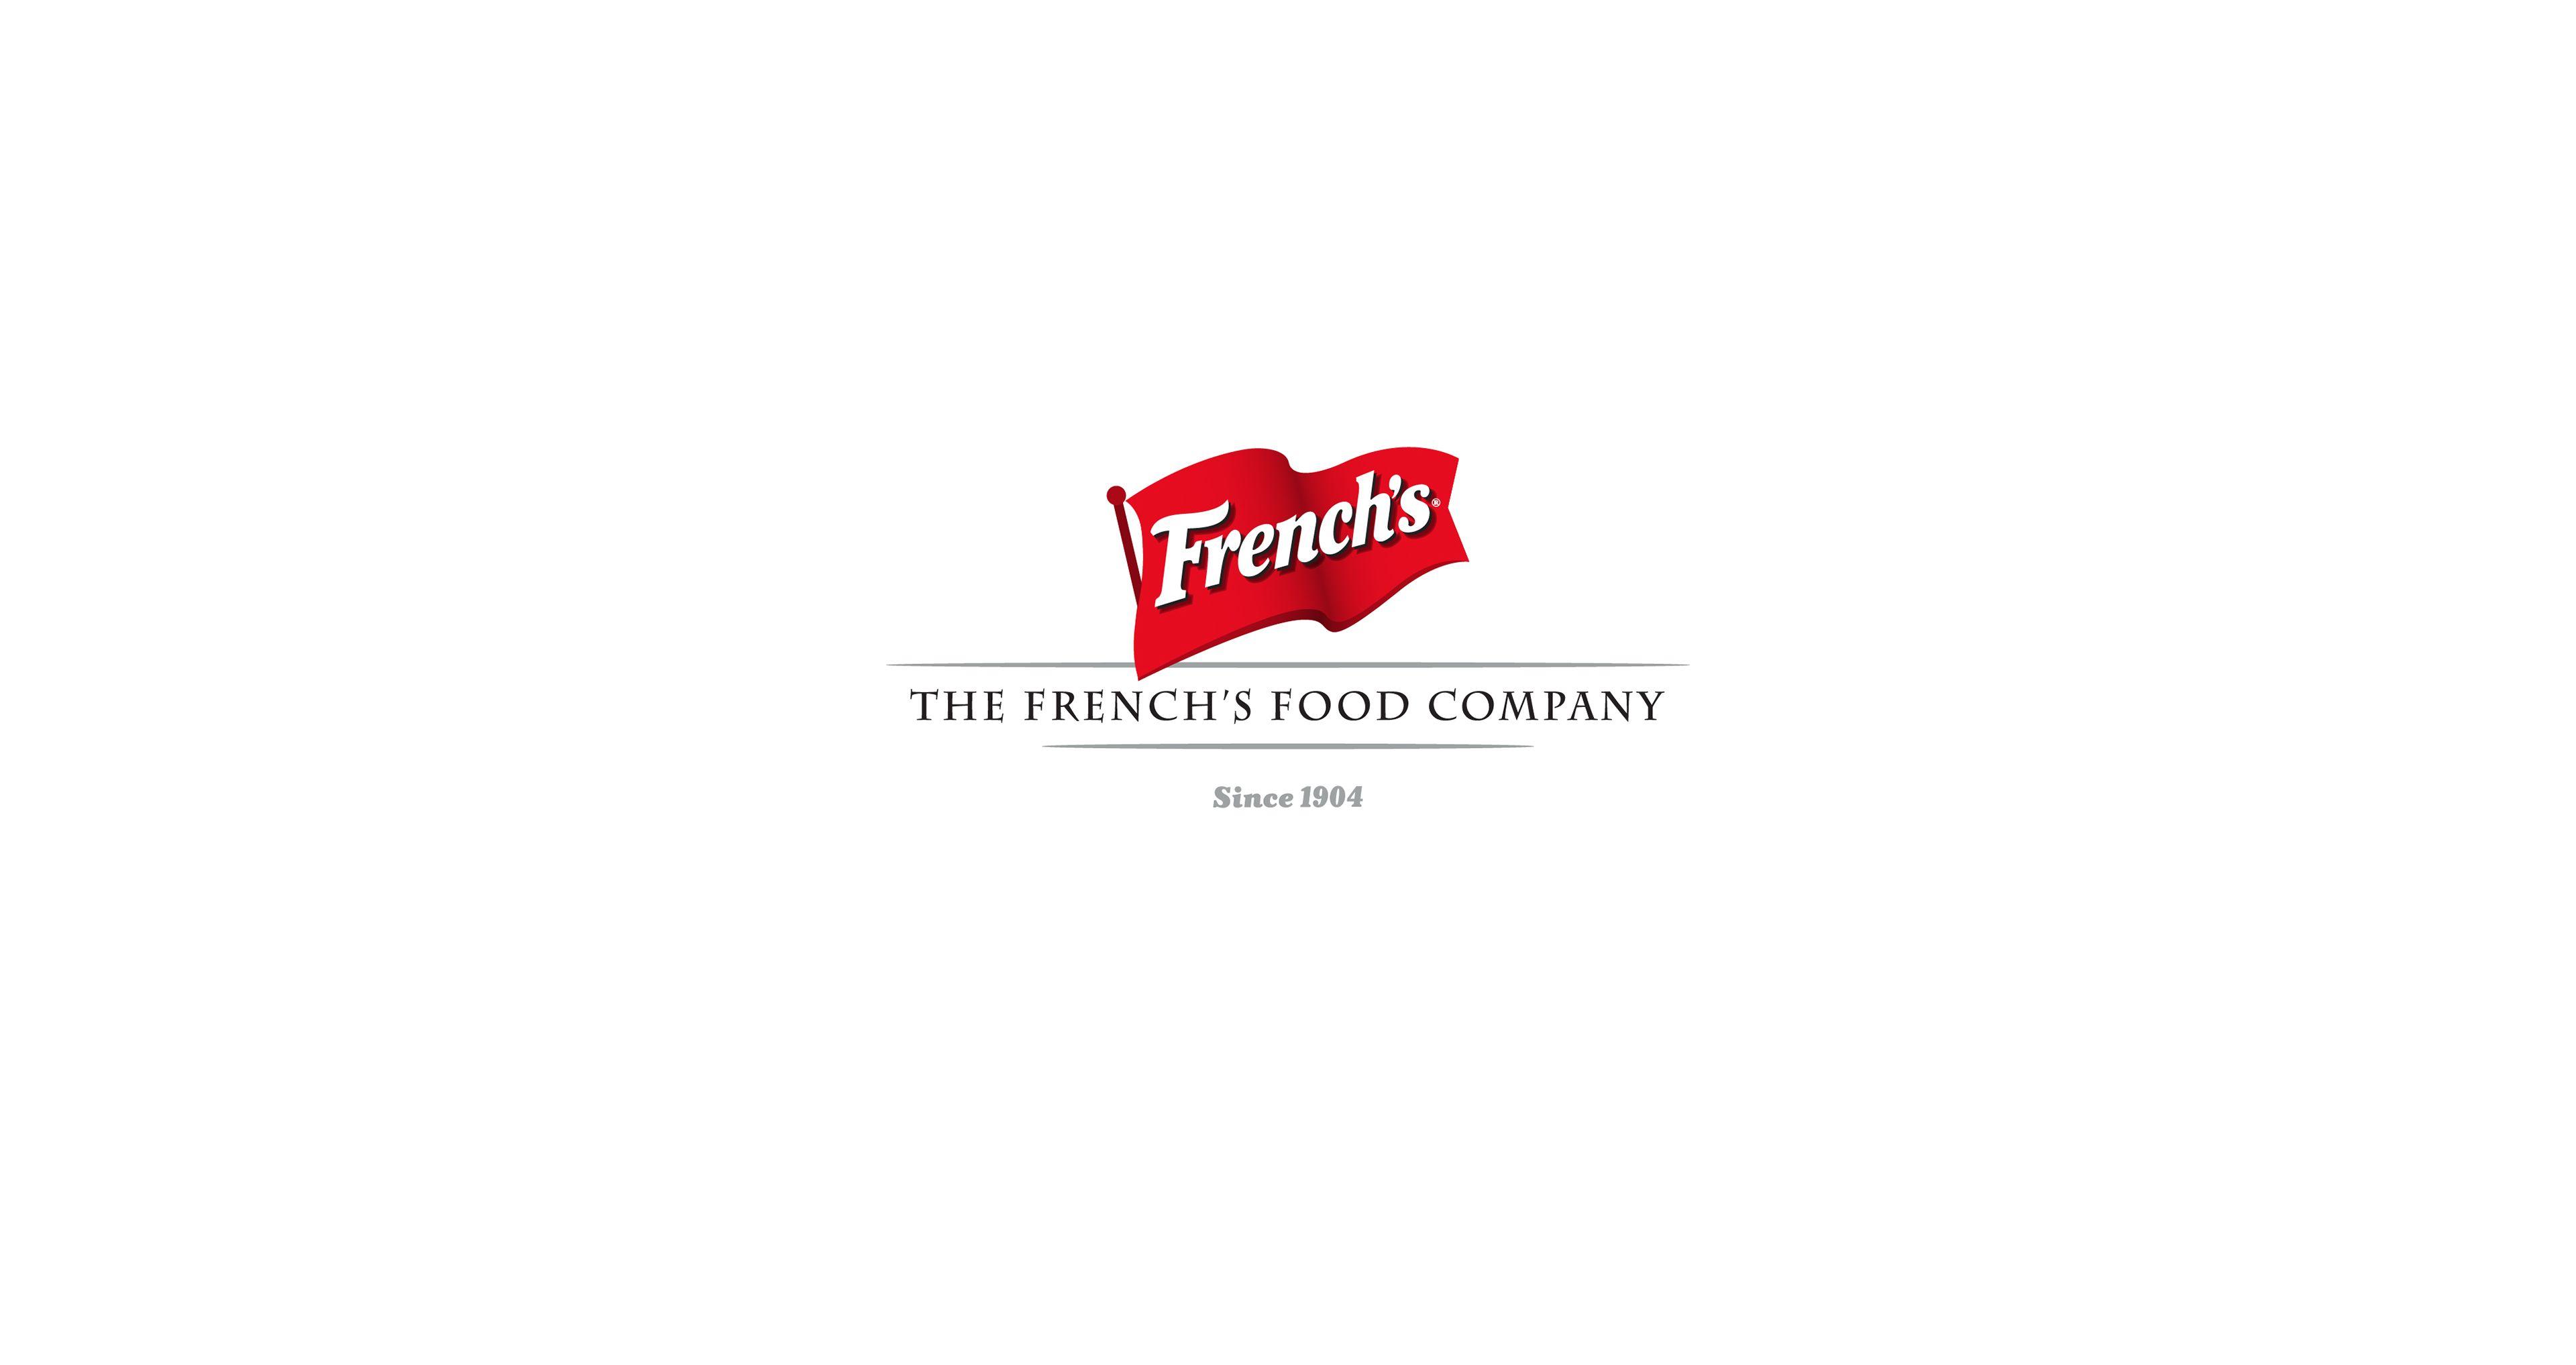 French Food Company Logo - The French's Food Company